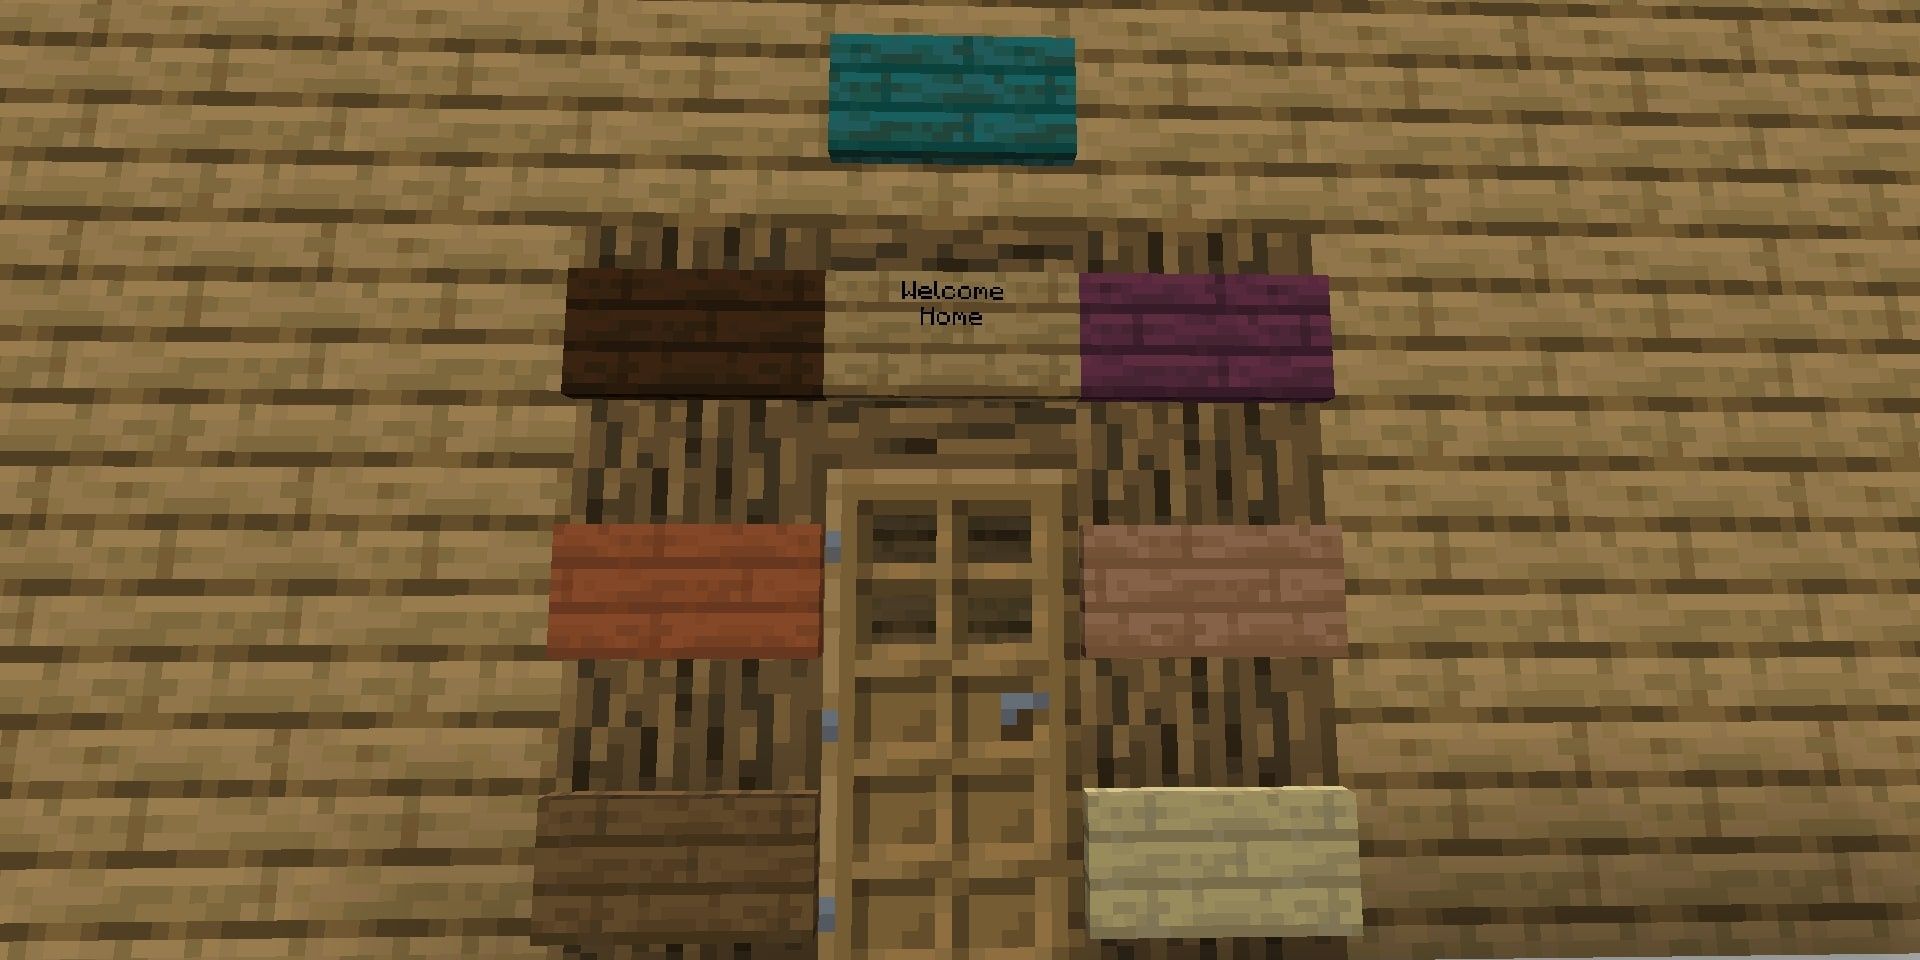 Different Signs in Minecraft